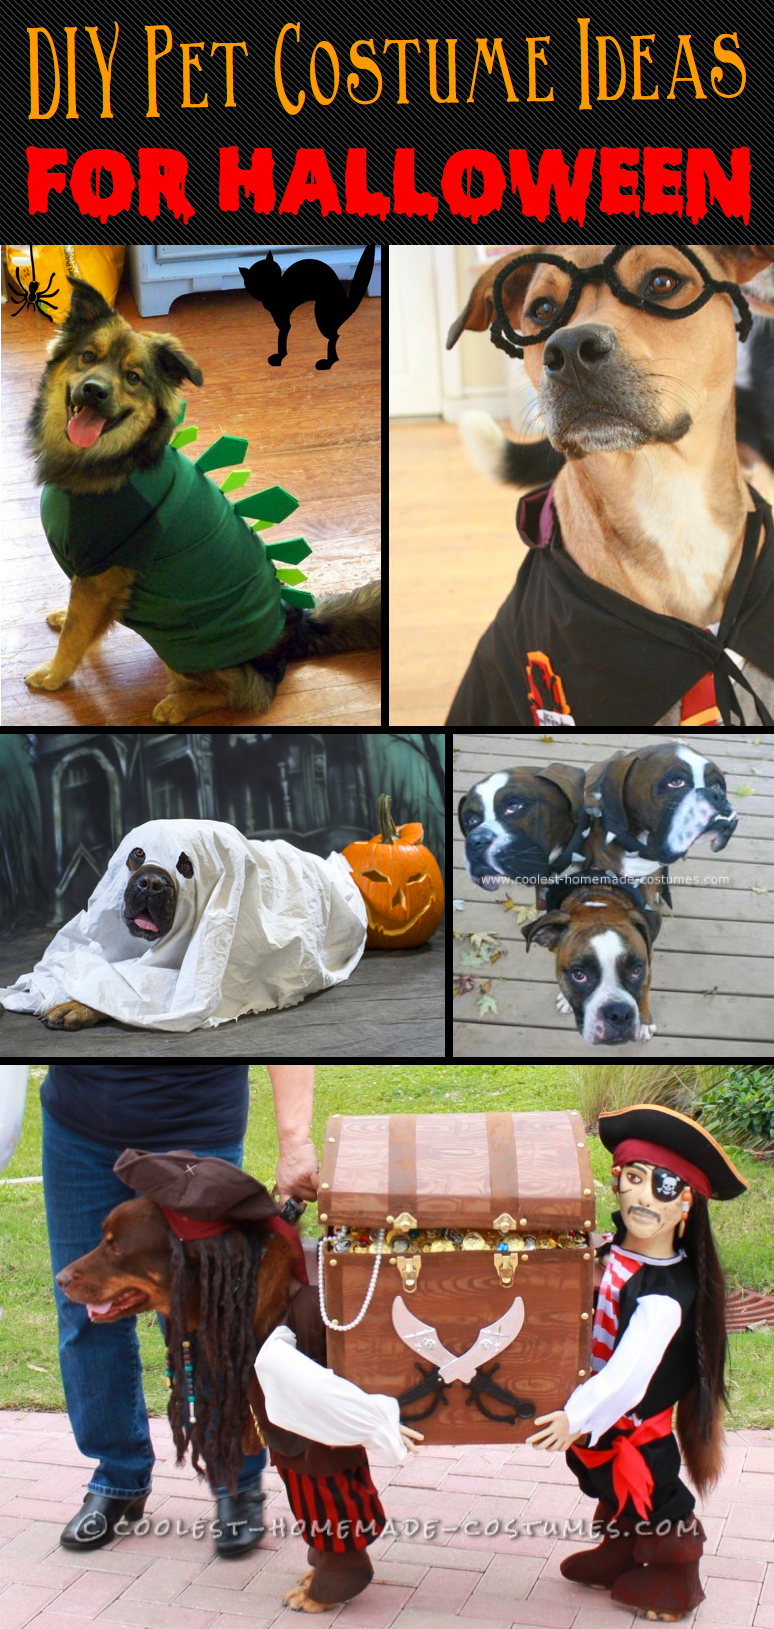 20-incredibly-adorable-yet-simple-diy-pet-costume-ideas-for-halloween